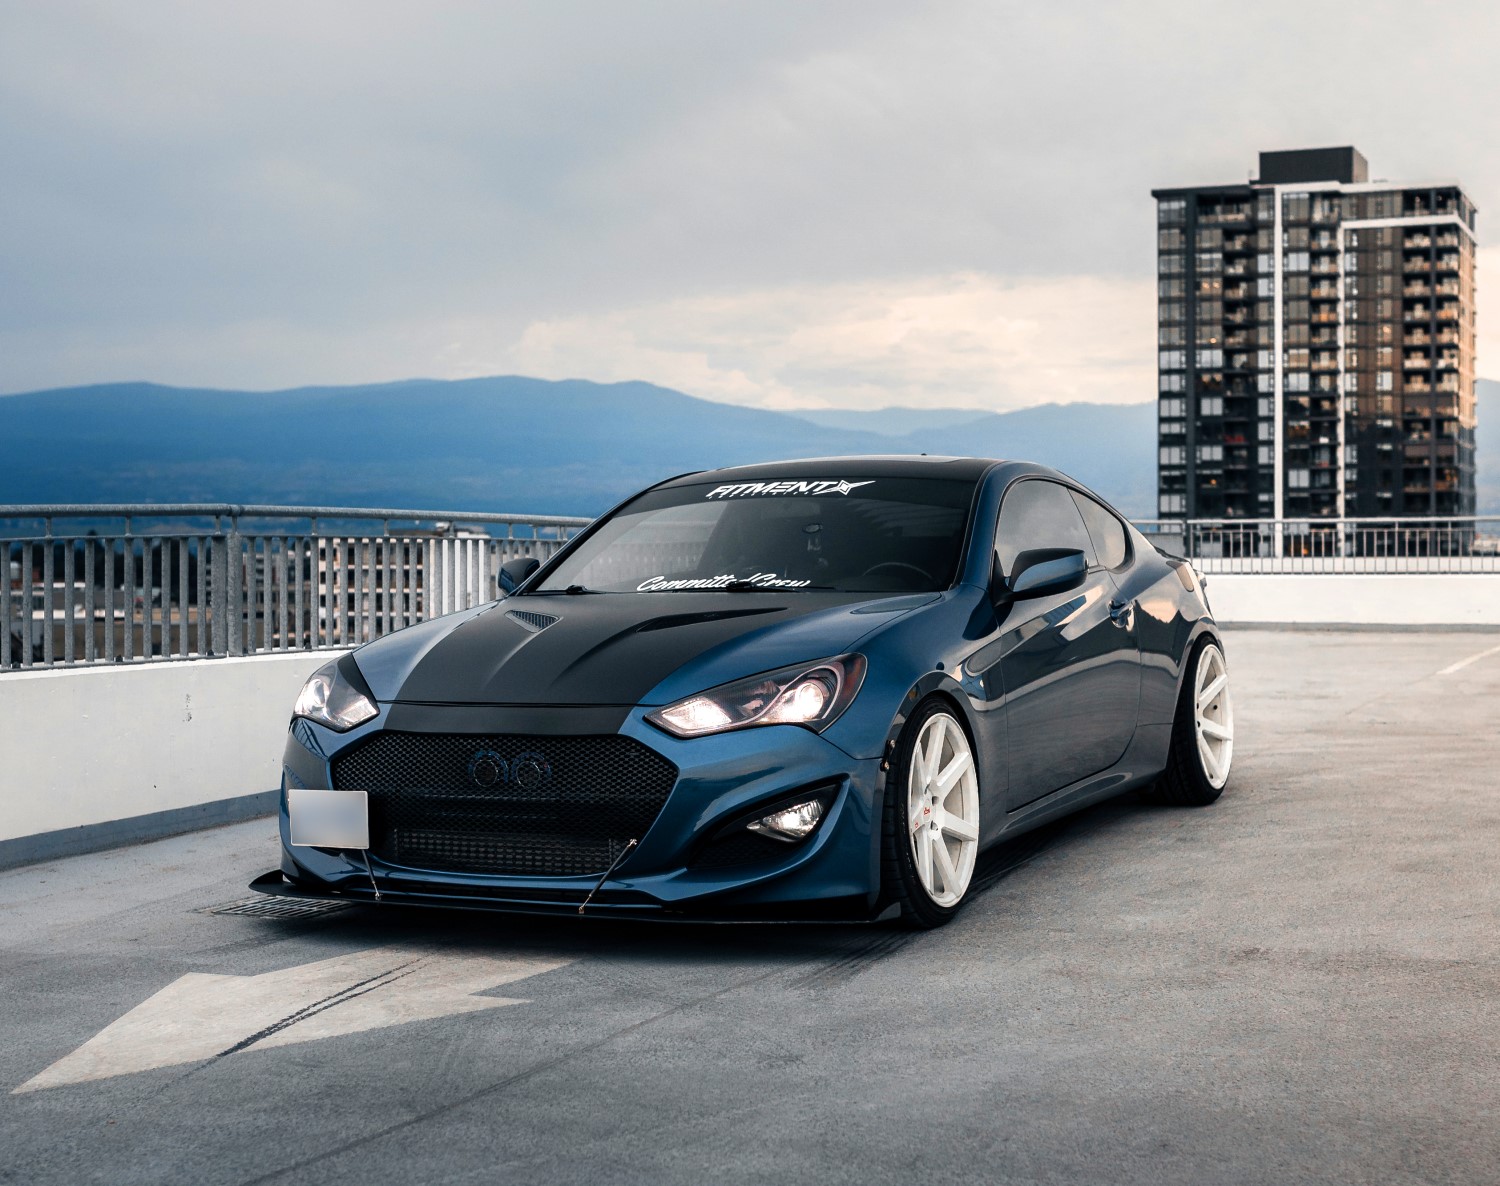 Black, Blue and White Beauty: Upgraded Hyundai Genesis Coupe with New Grille